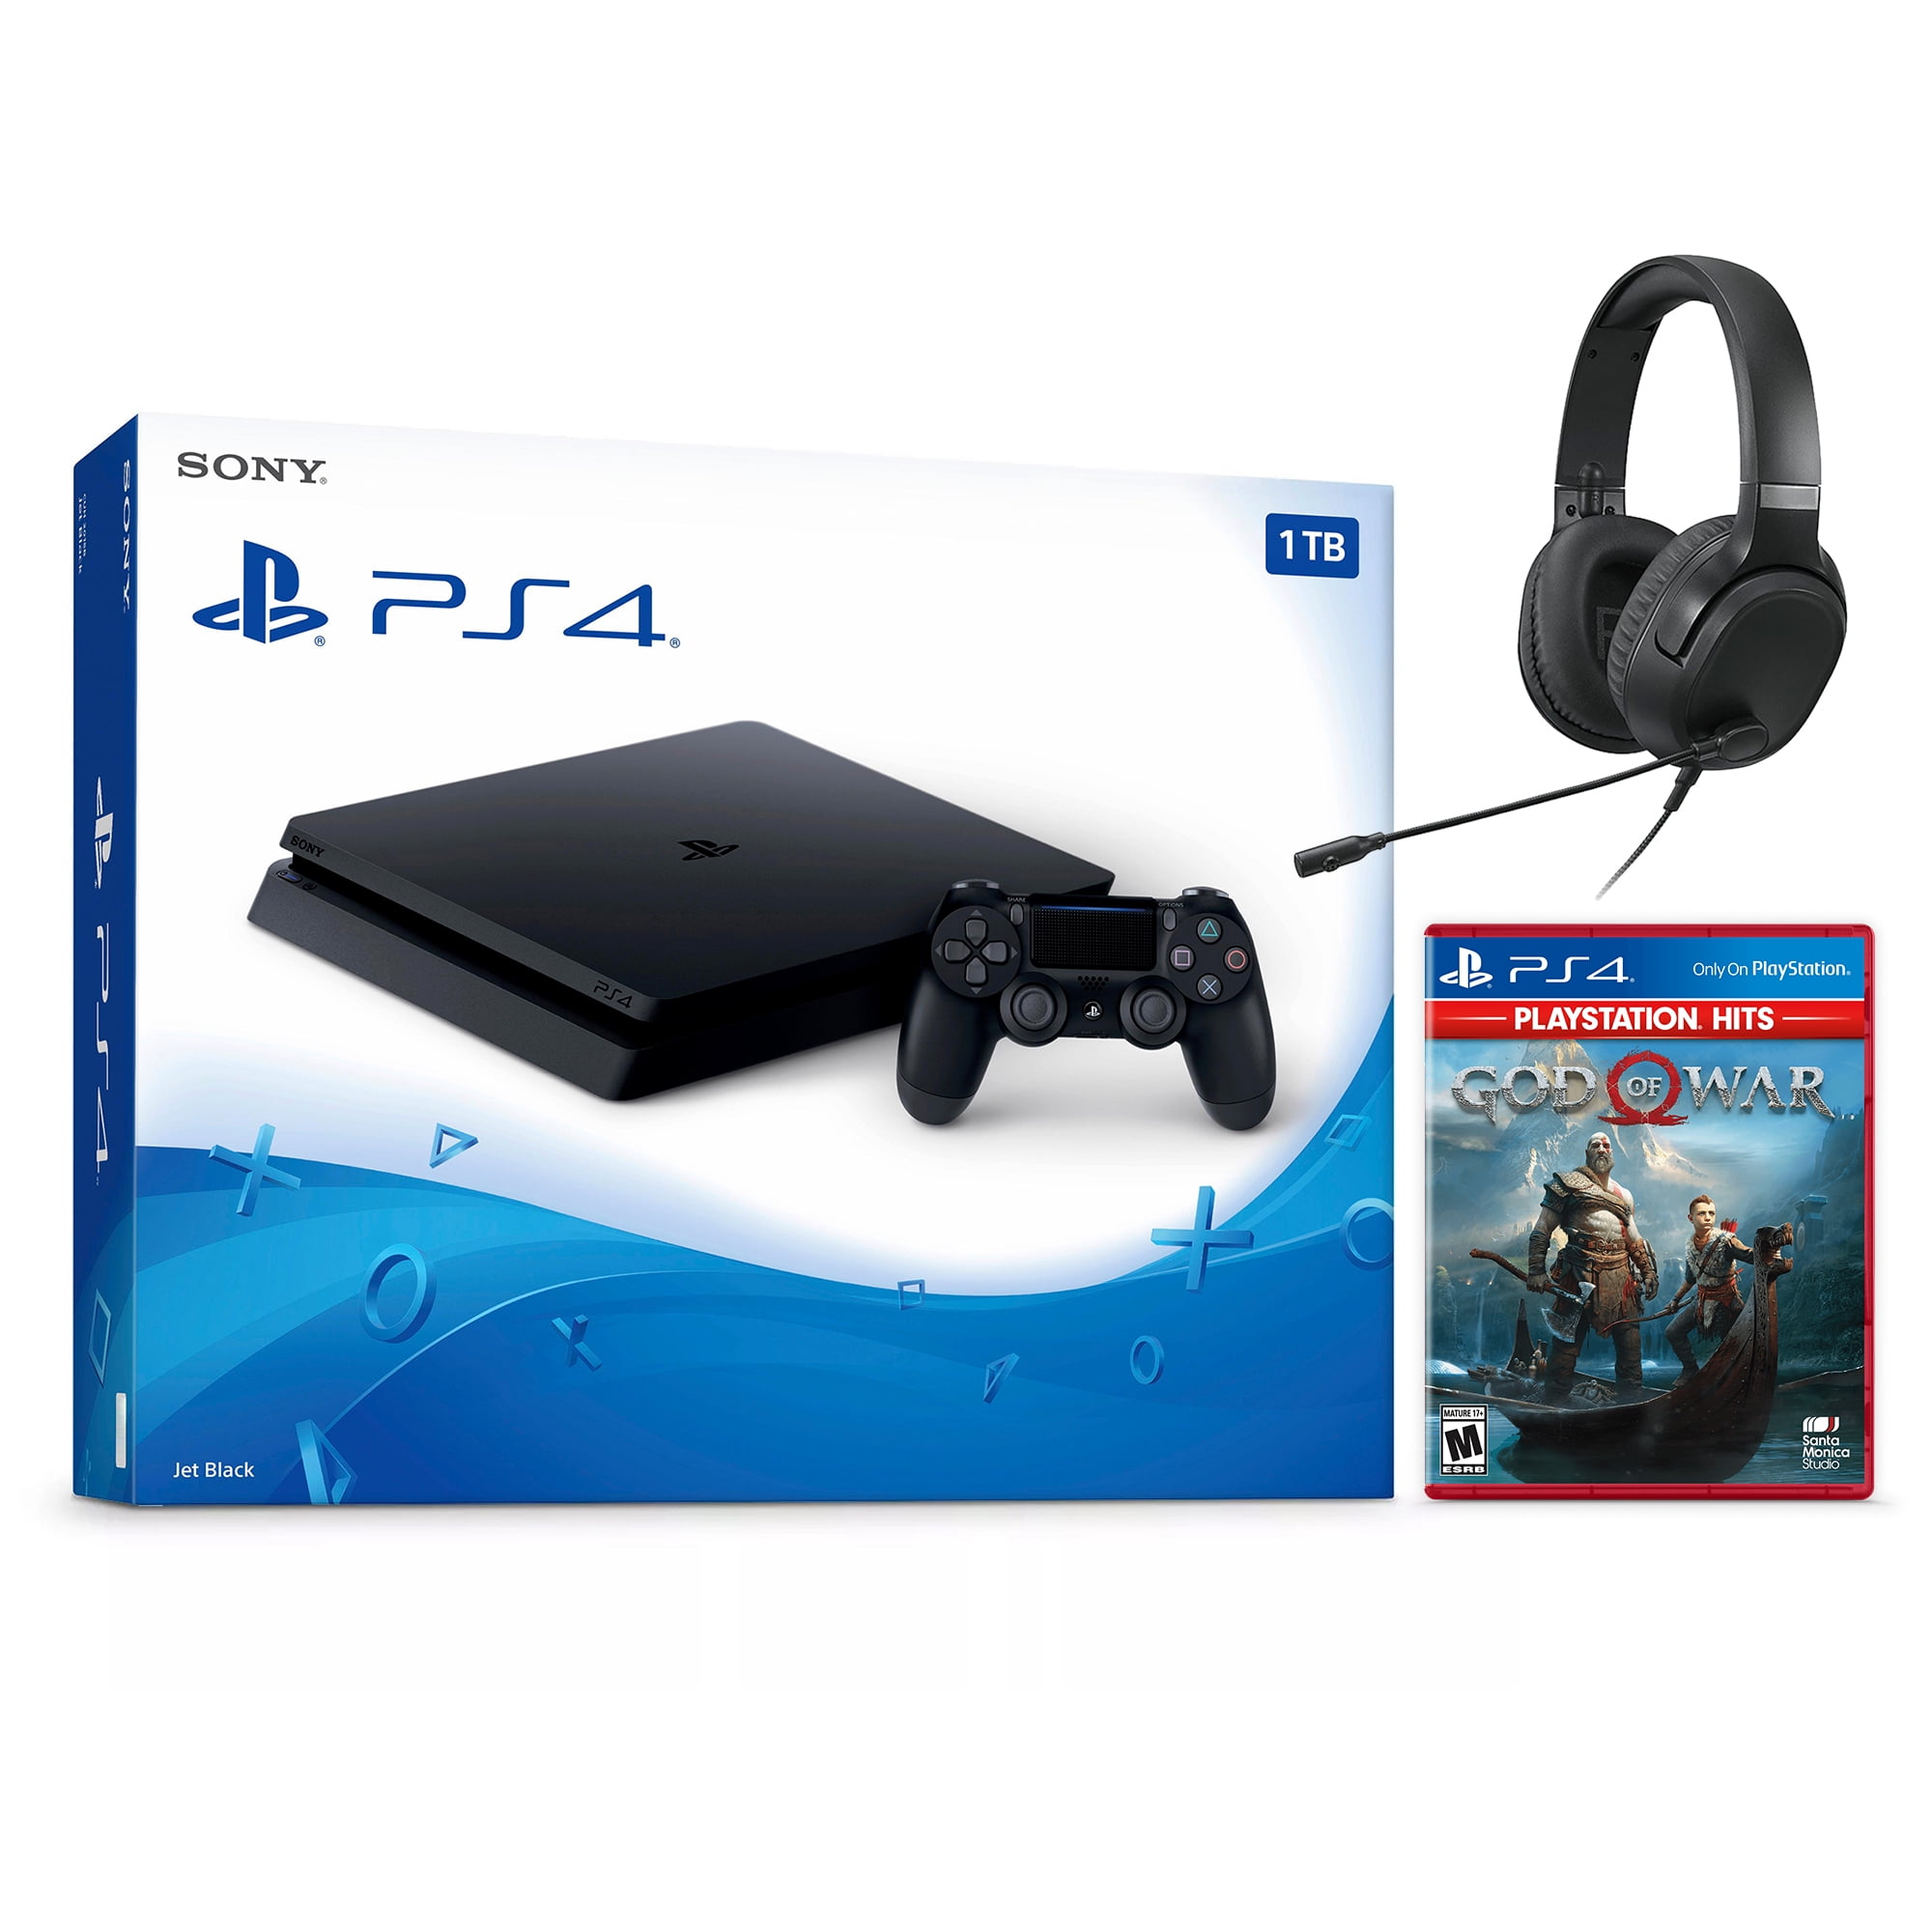 PlayStation 4 Slim (1TB) PS4 Hits Console Bundle includes God Of War, GT  Sport, Uncharted 4 (Import Version)